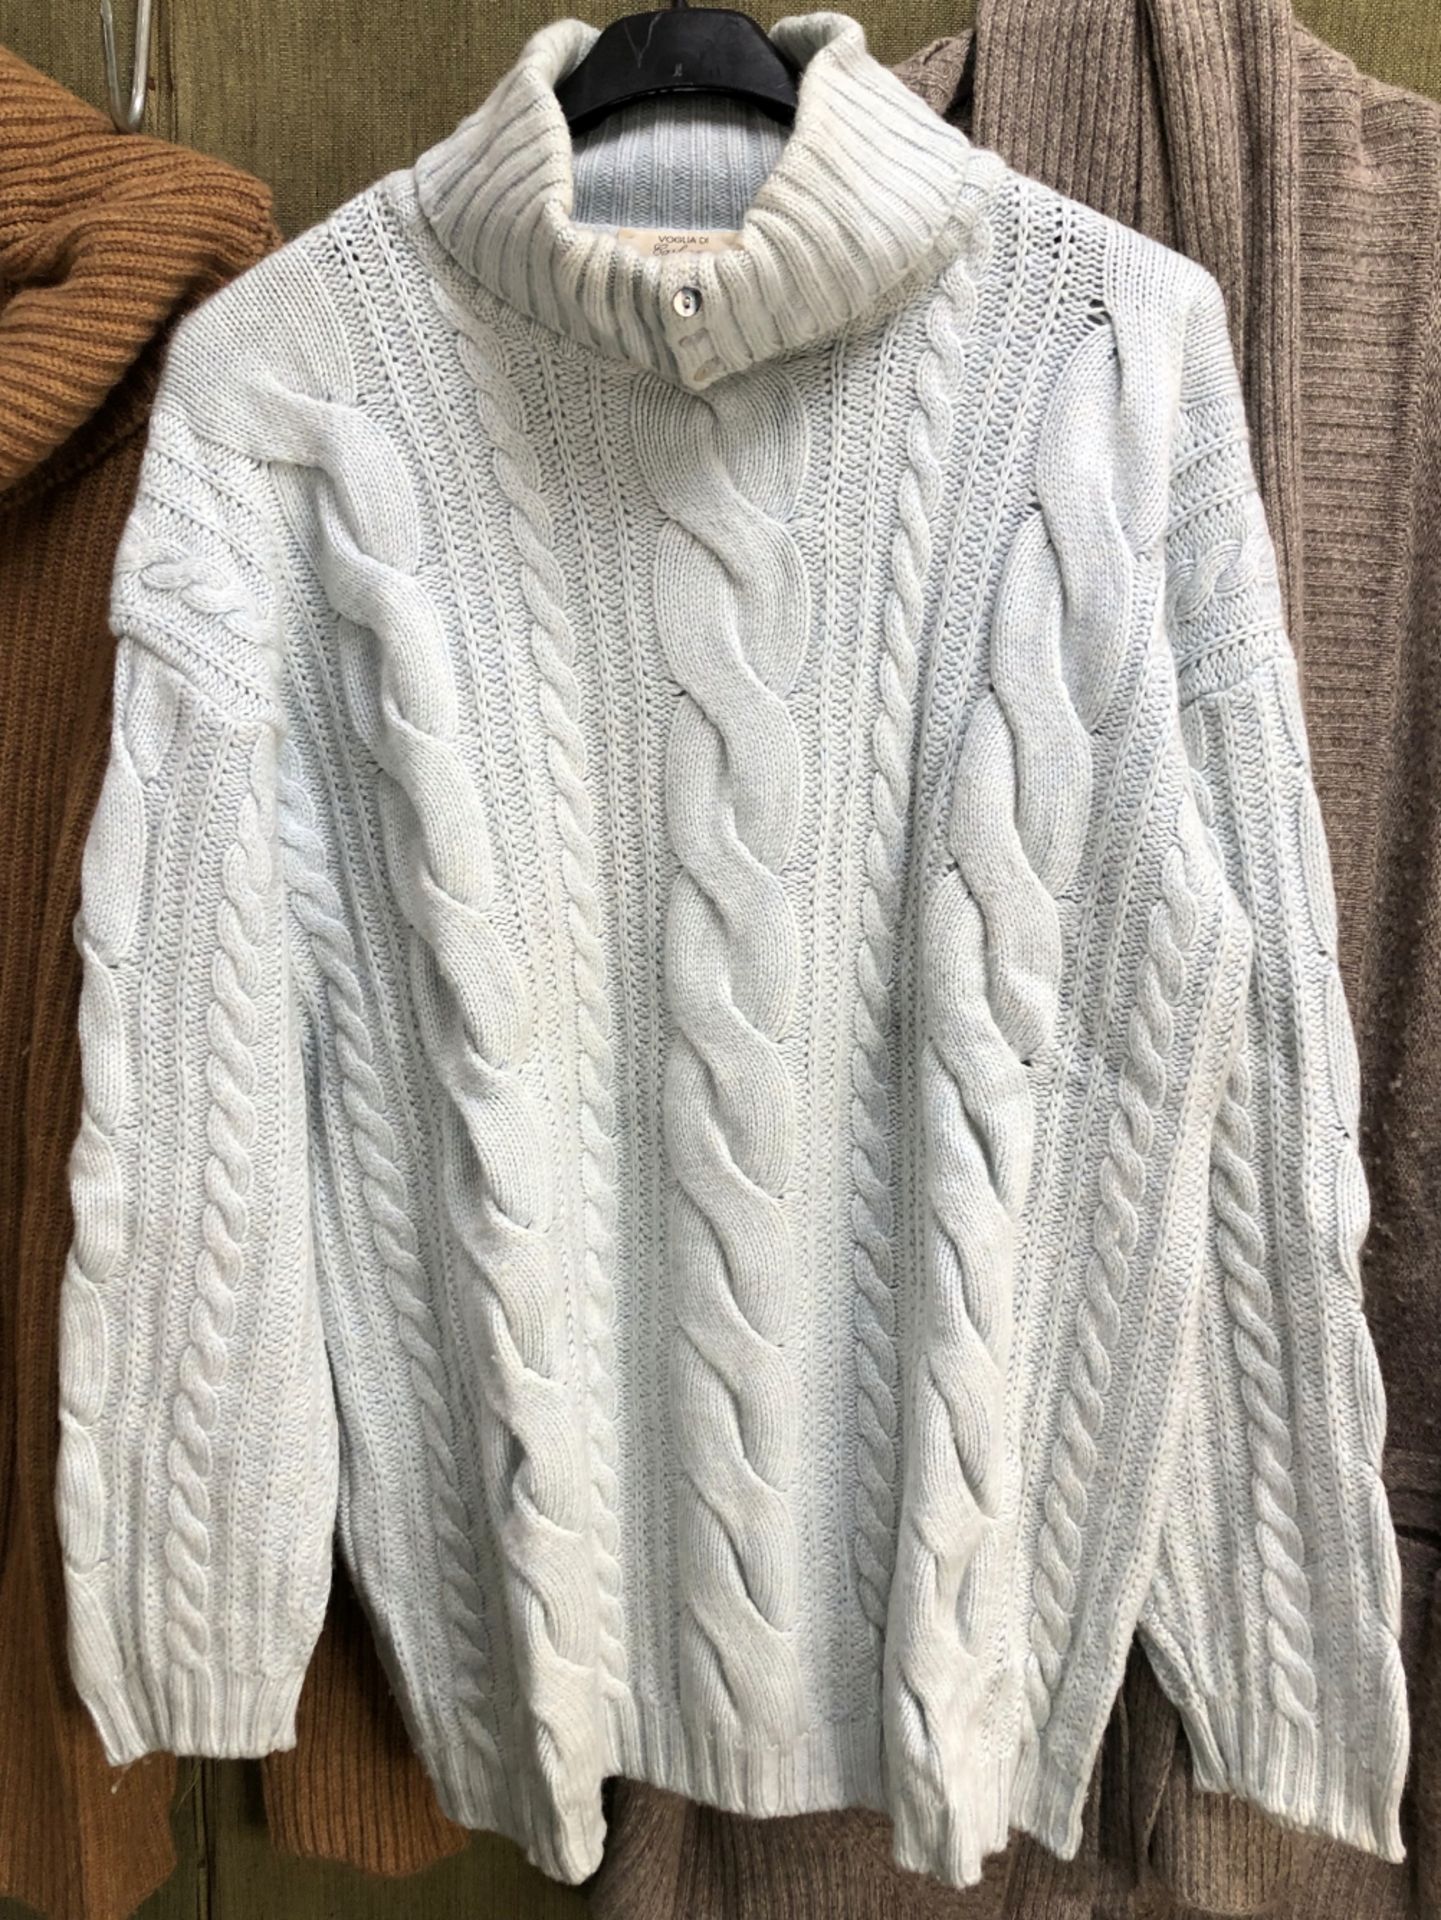 A JOHNSTONS CASHMERE 44" CABLE KNIT CARDIGAN, A KNITTED CARDIGAN WITH NECK TIE, A TSE CASHMERE - Image 6 of 16